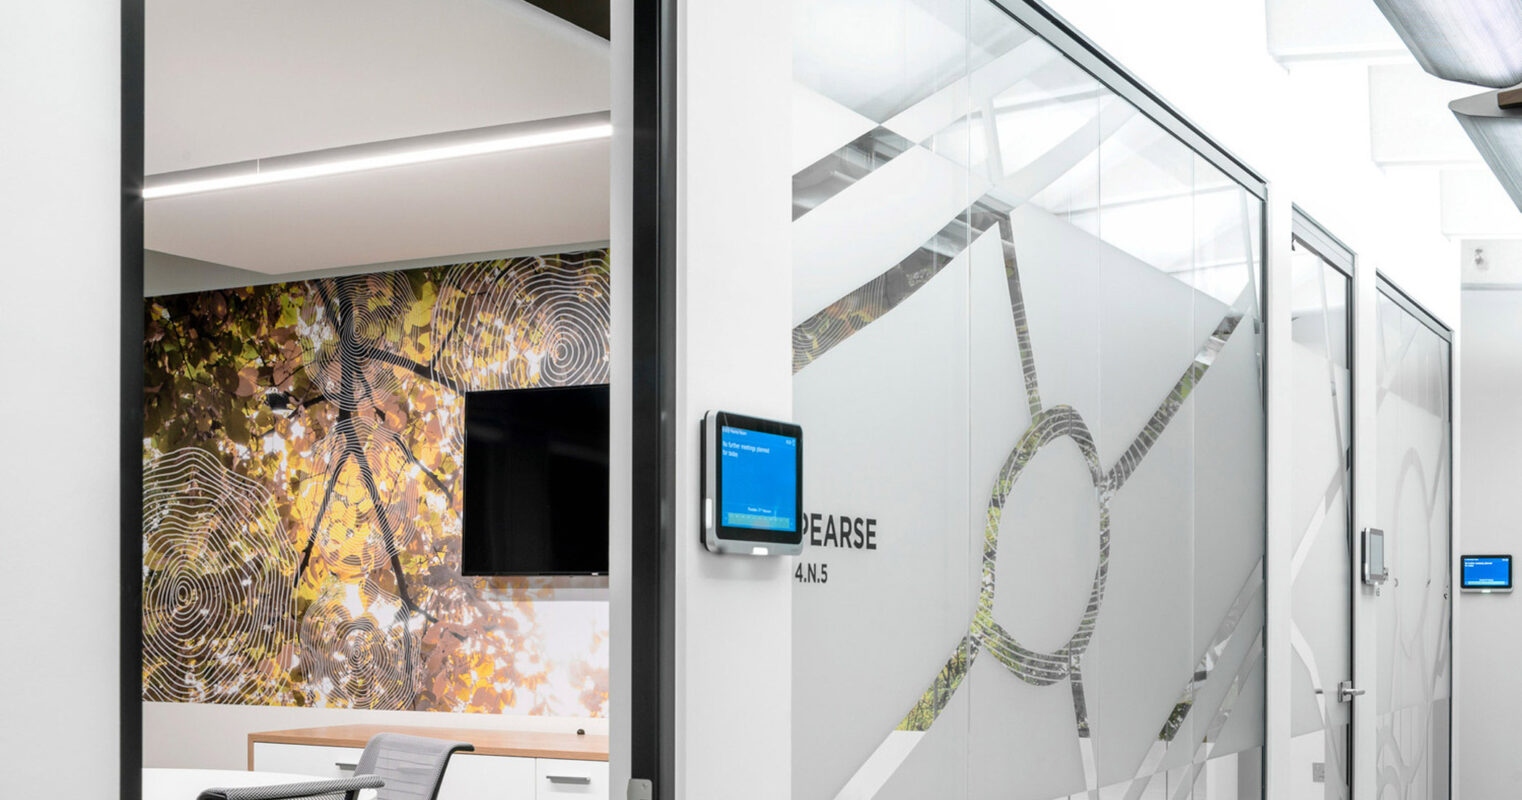 Modern office meeting room featuring a glass partition with abstract frosted design, complemented by an adjacent wall adorned with a vibrant, organic-patterned mural. Overhead, geometric lighting fixtures contribute to a balanced, inviting workspace.